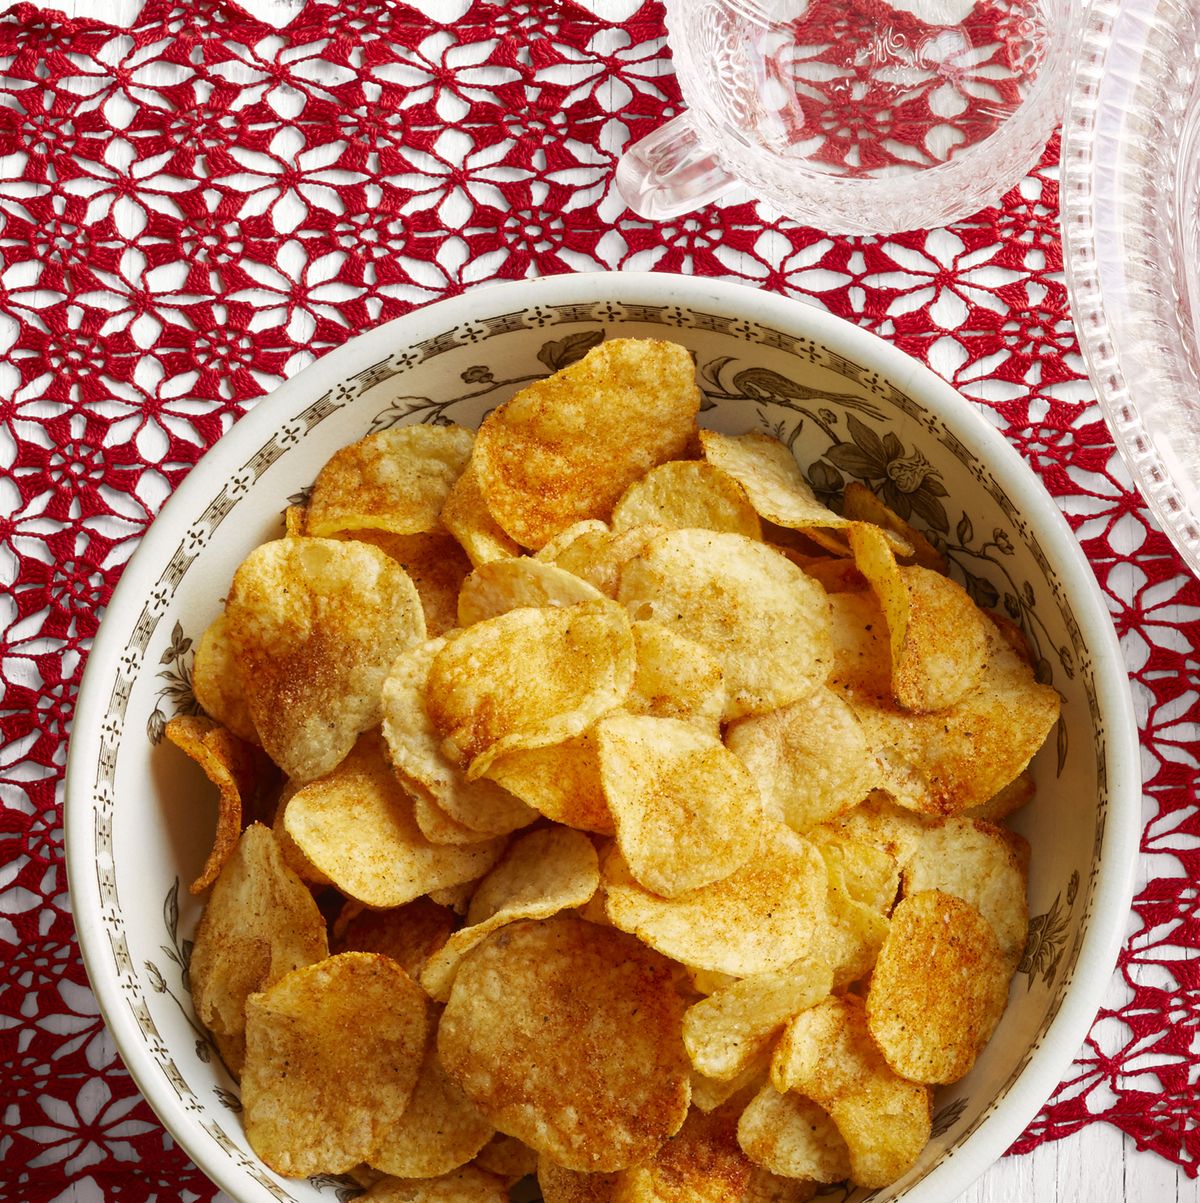 https://hips.hearstapps.com/hmg-prod/images/spiced-up-potato-chips-1601911089.jpg?crop=1.00xw:0.668xh;0,0.0987xh&resize=1200:*